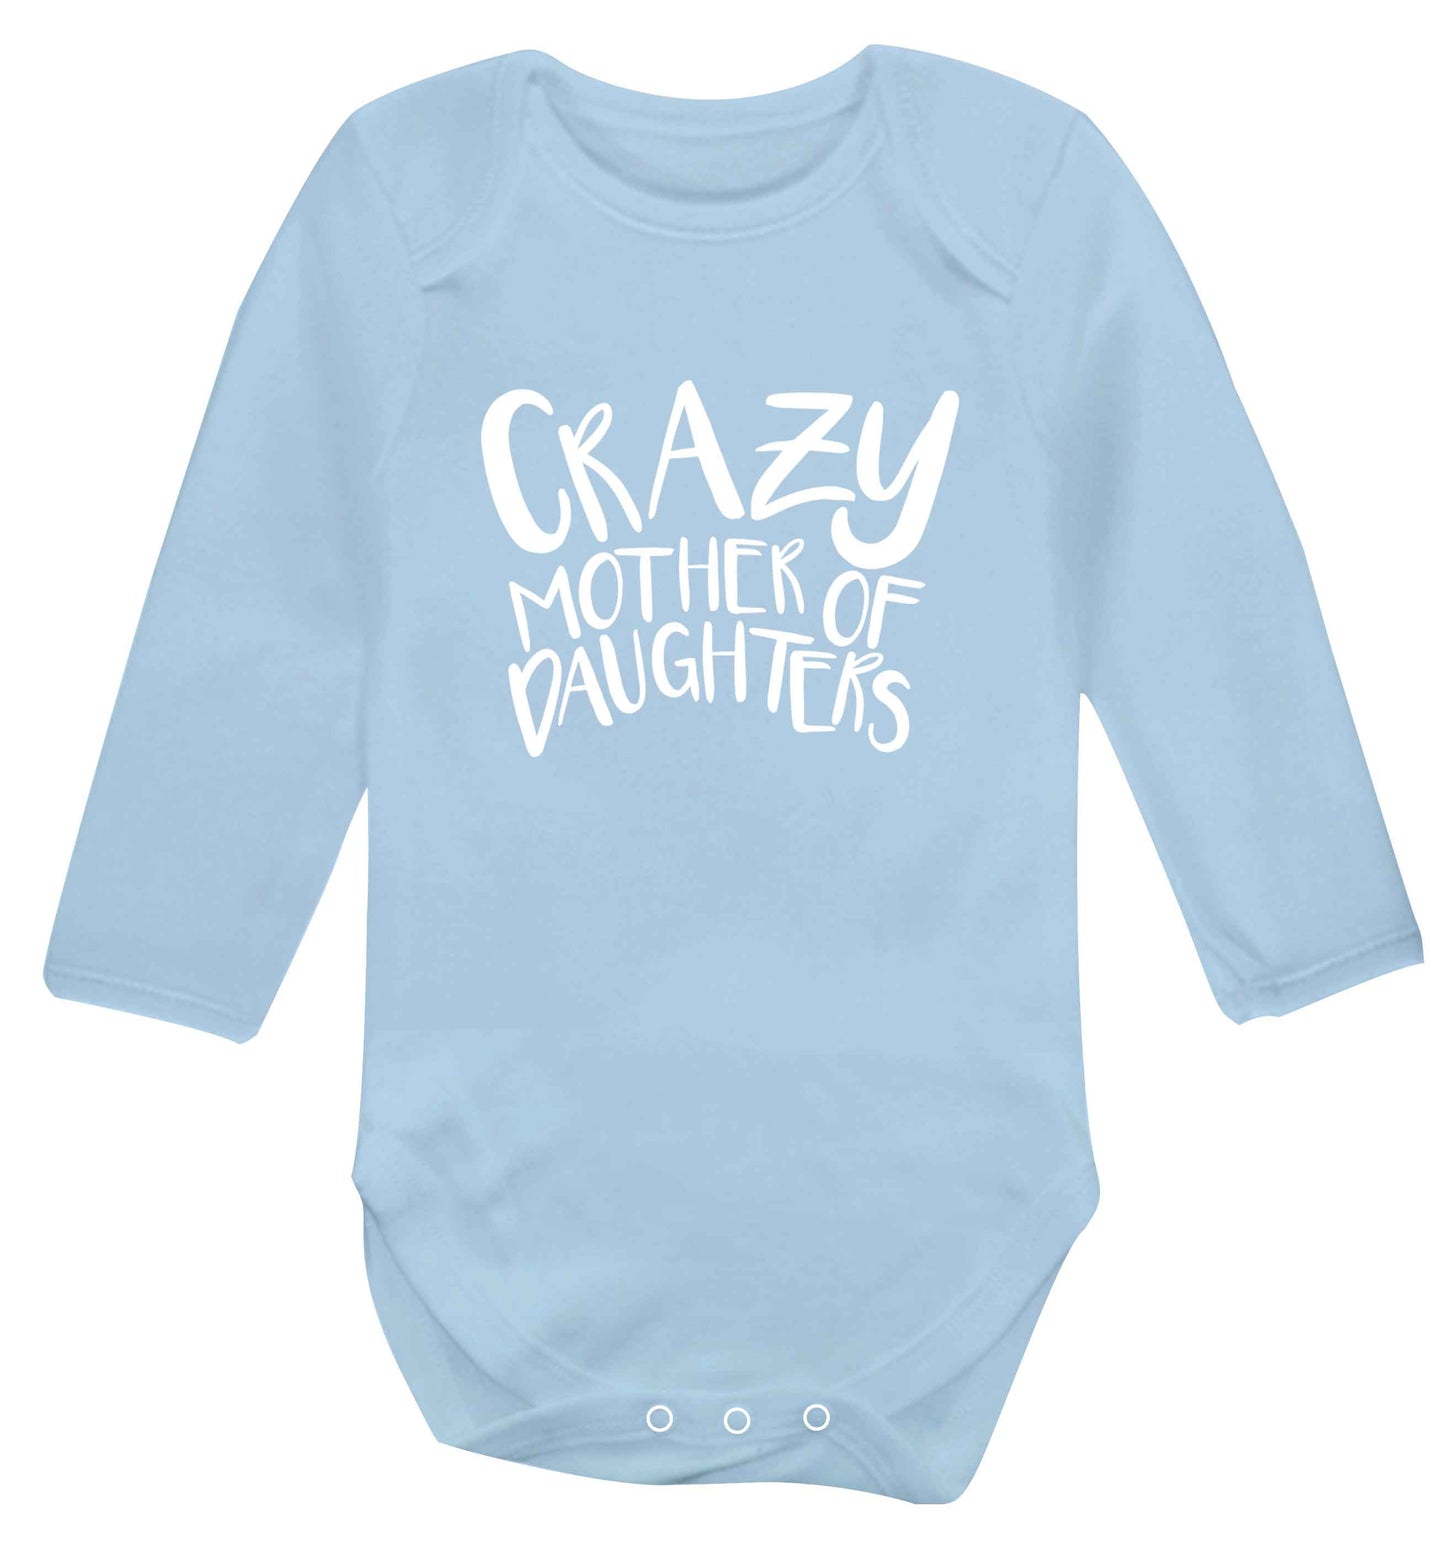 Crazy mother of daughters baby vest long sleeved pale blue 6-12 months